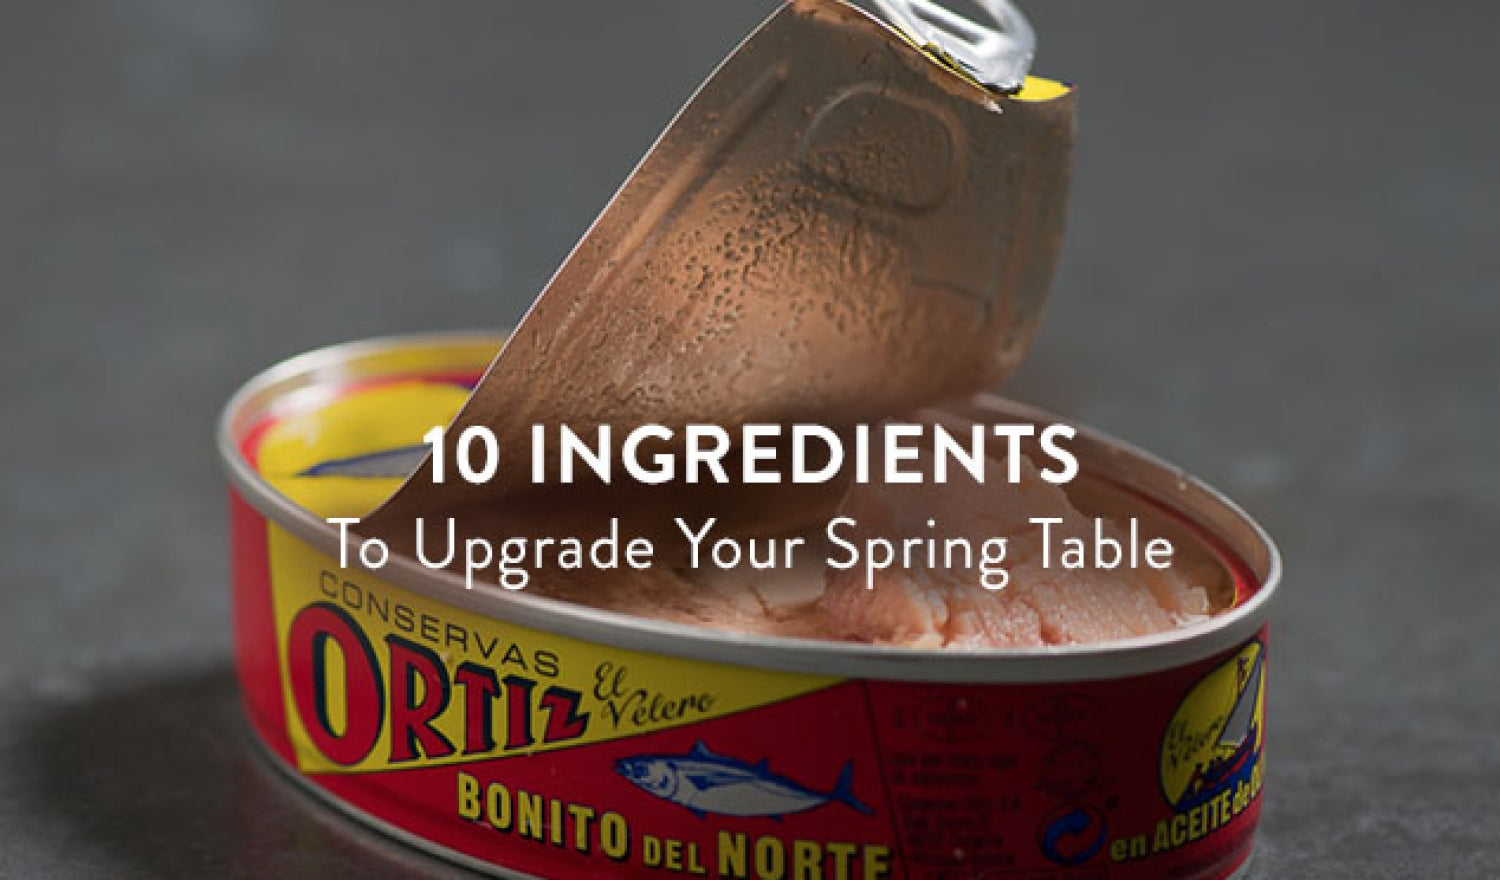 10 Ingredients To Discover This Spring